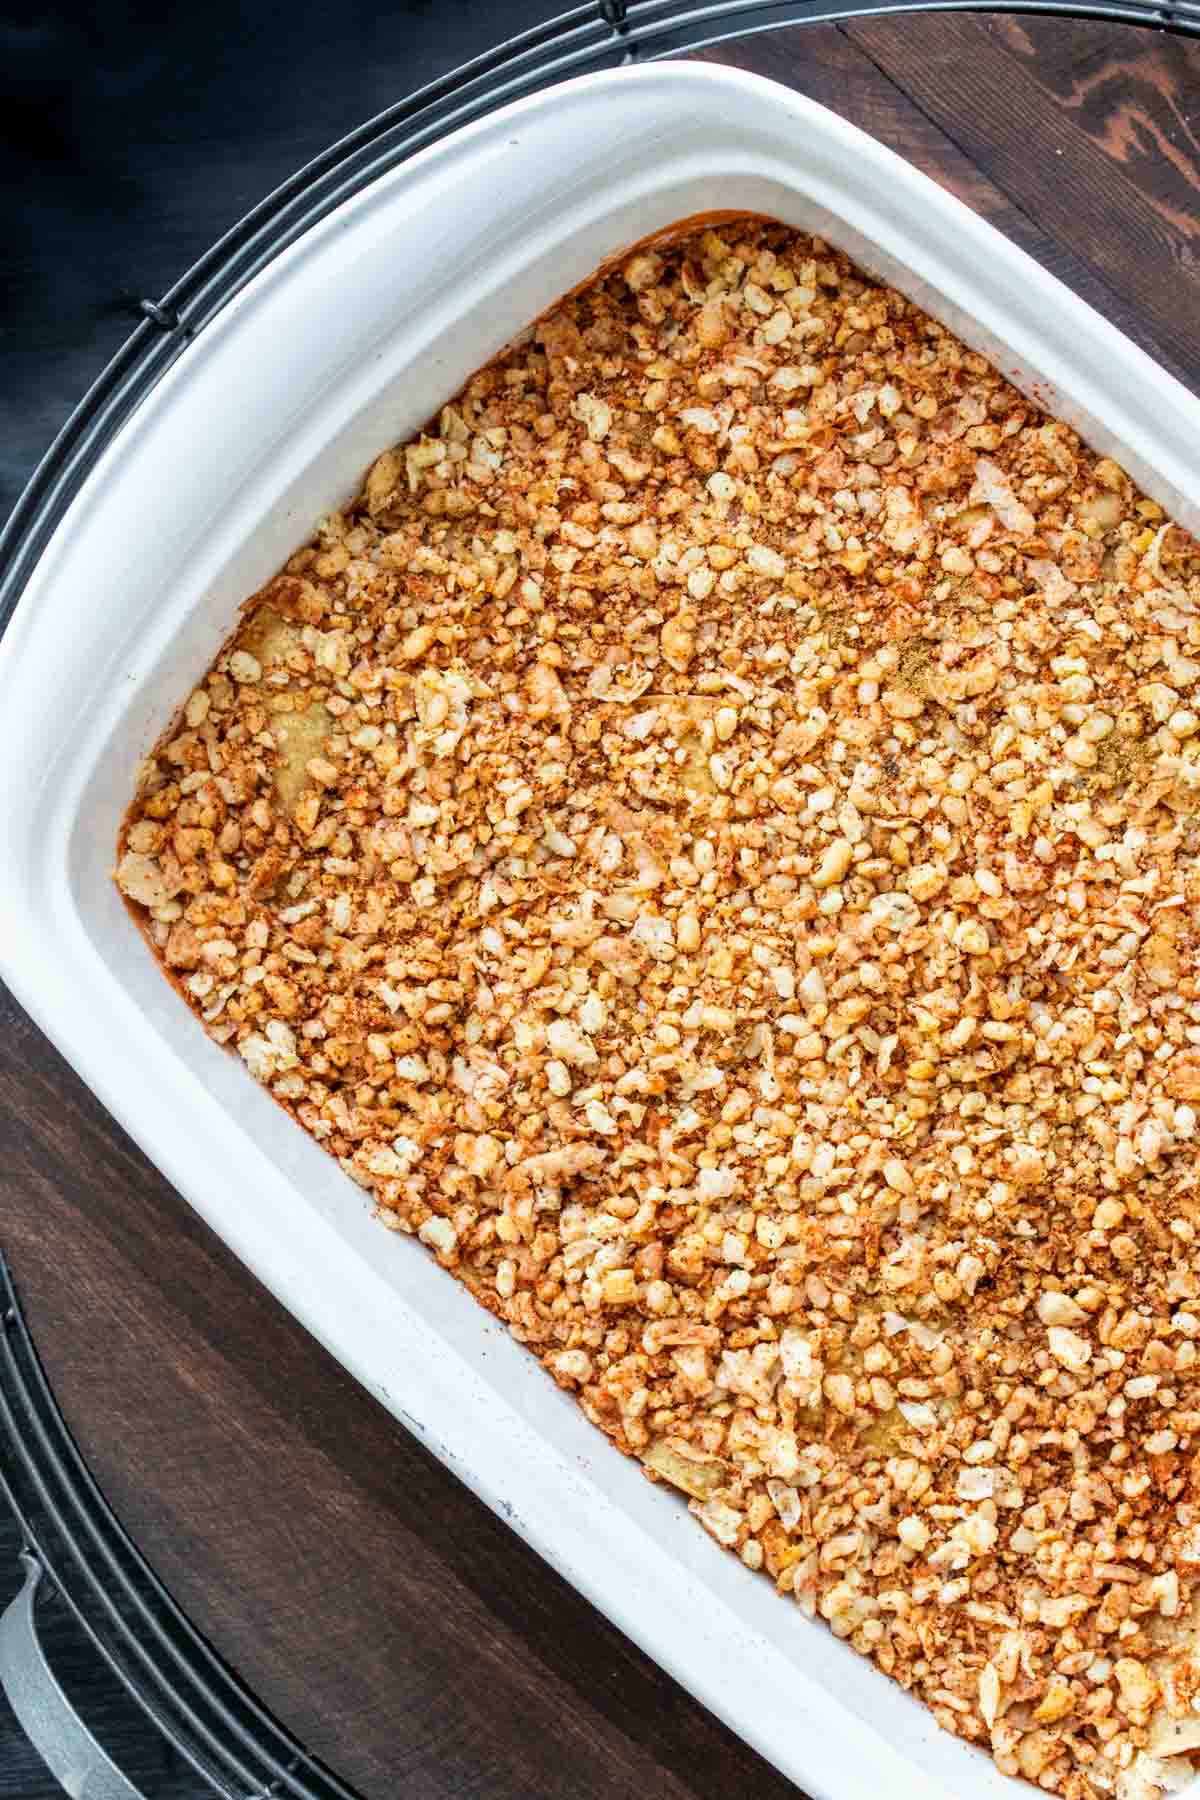 Top view of a white baking dish with an orange meaty crumble in it.